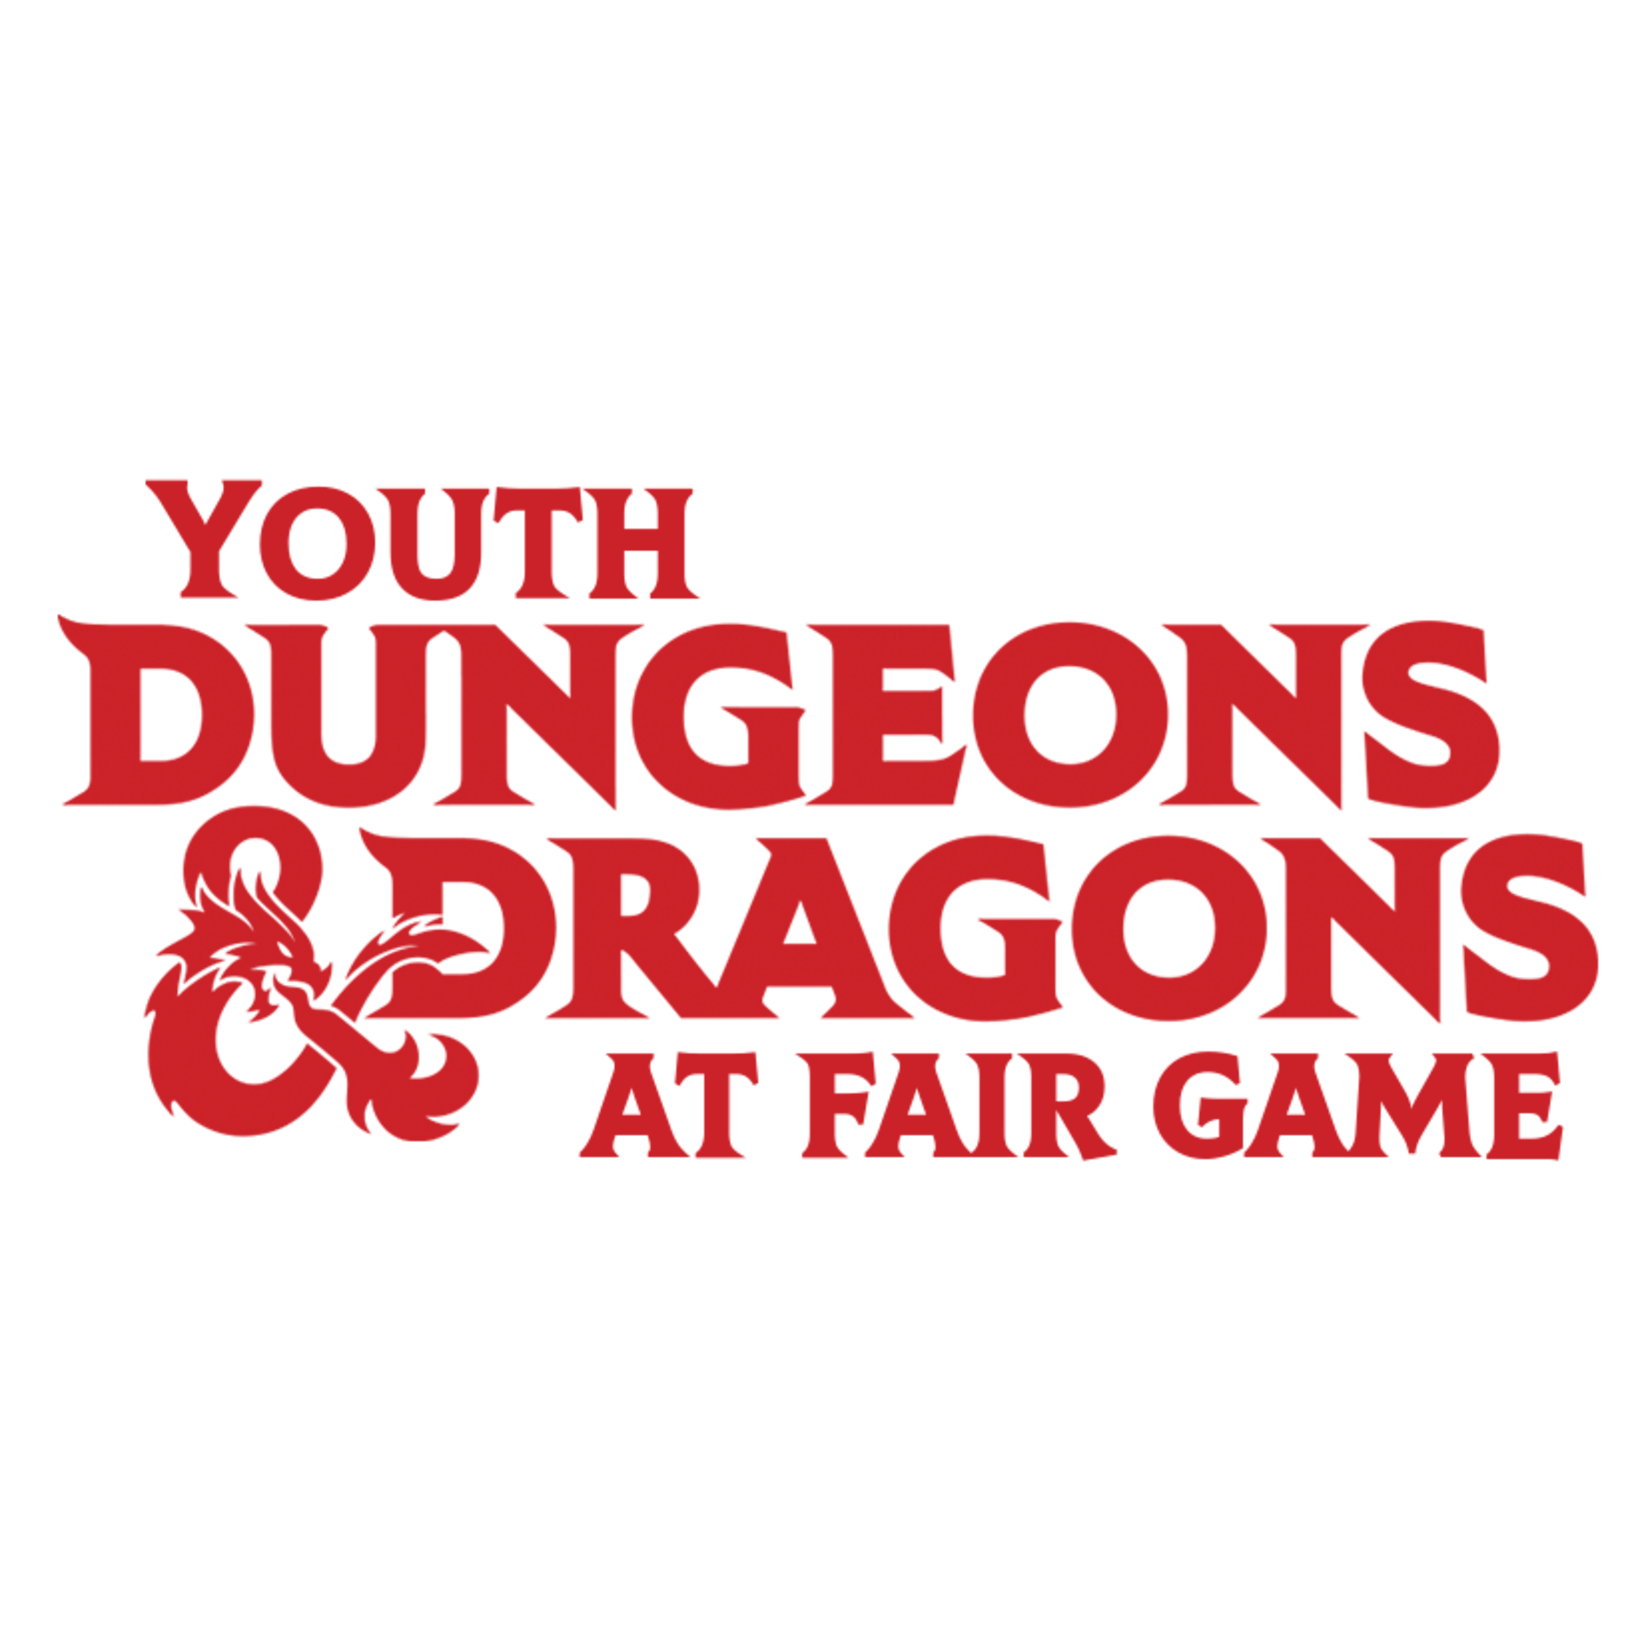 Fair Game YDND: Tuesday, August 2 - Downers Grove 4-6 PM (Ages 13-17)